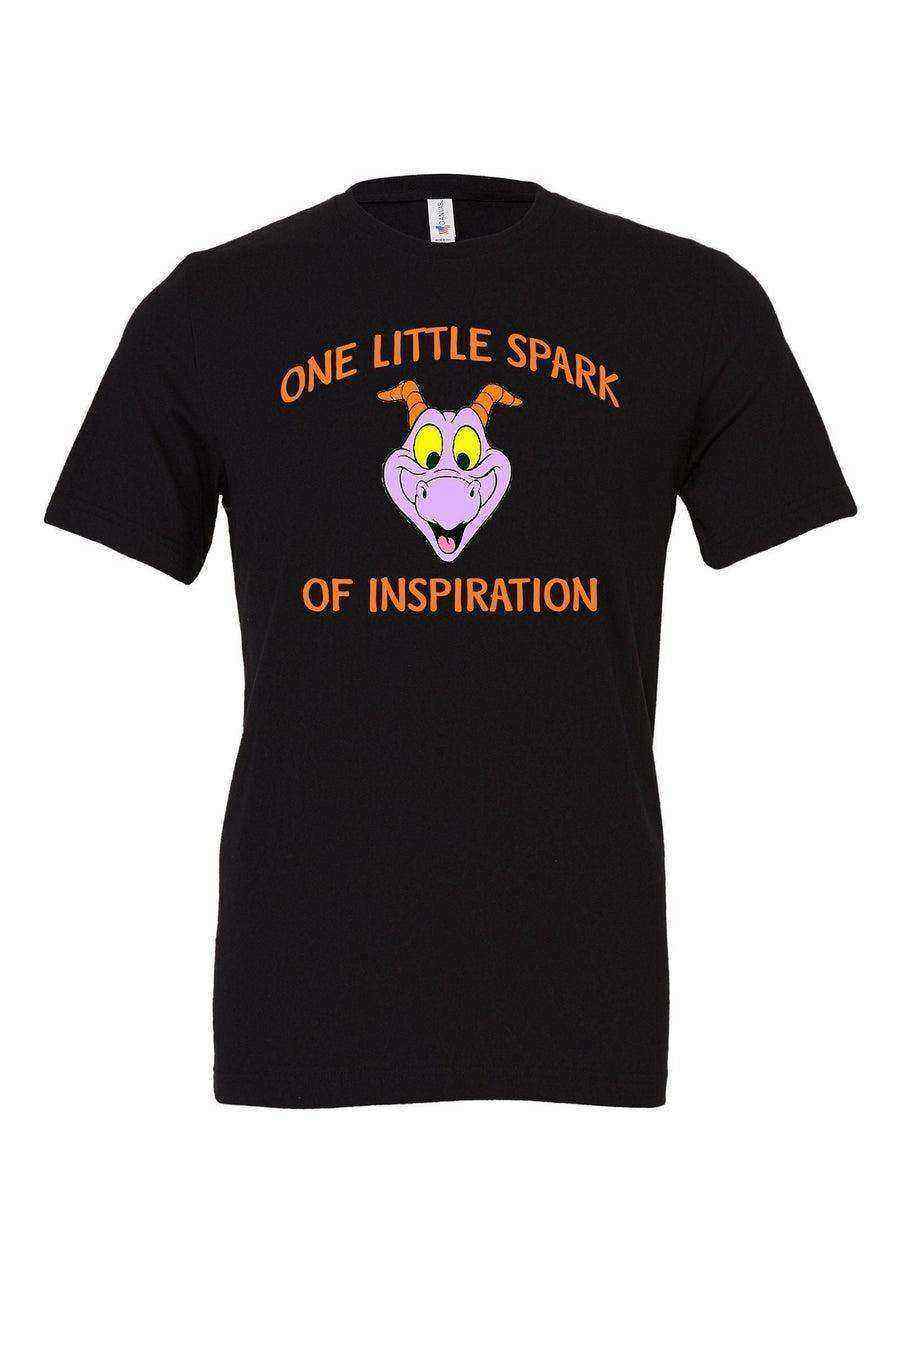 Figment One Little Spark Tee | Imagination - Dylan's Tees